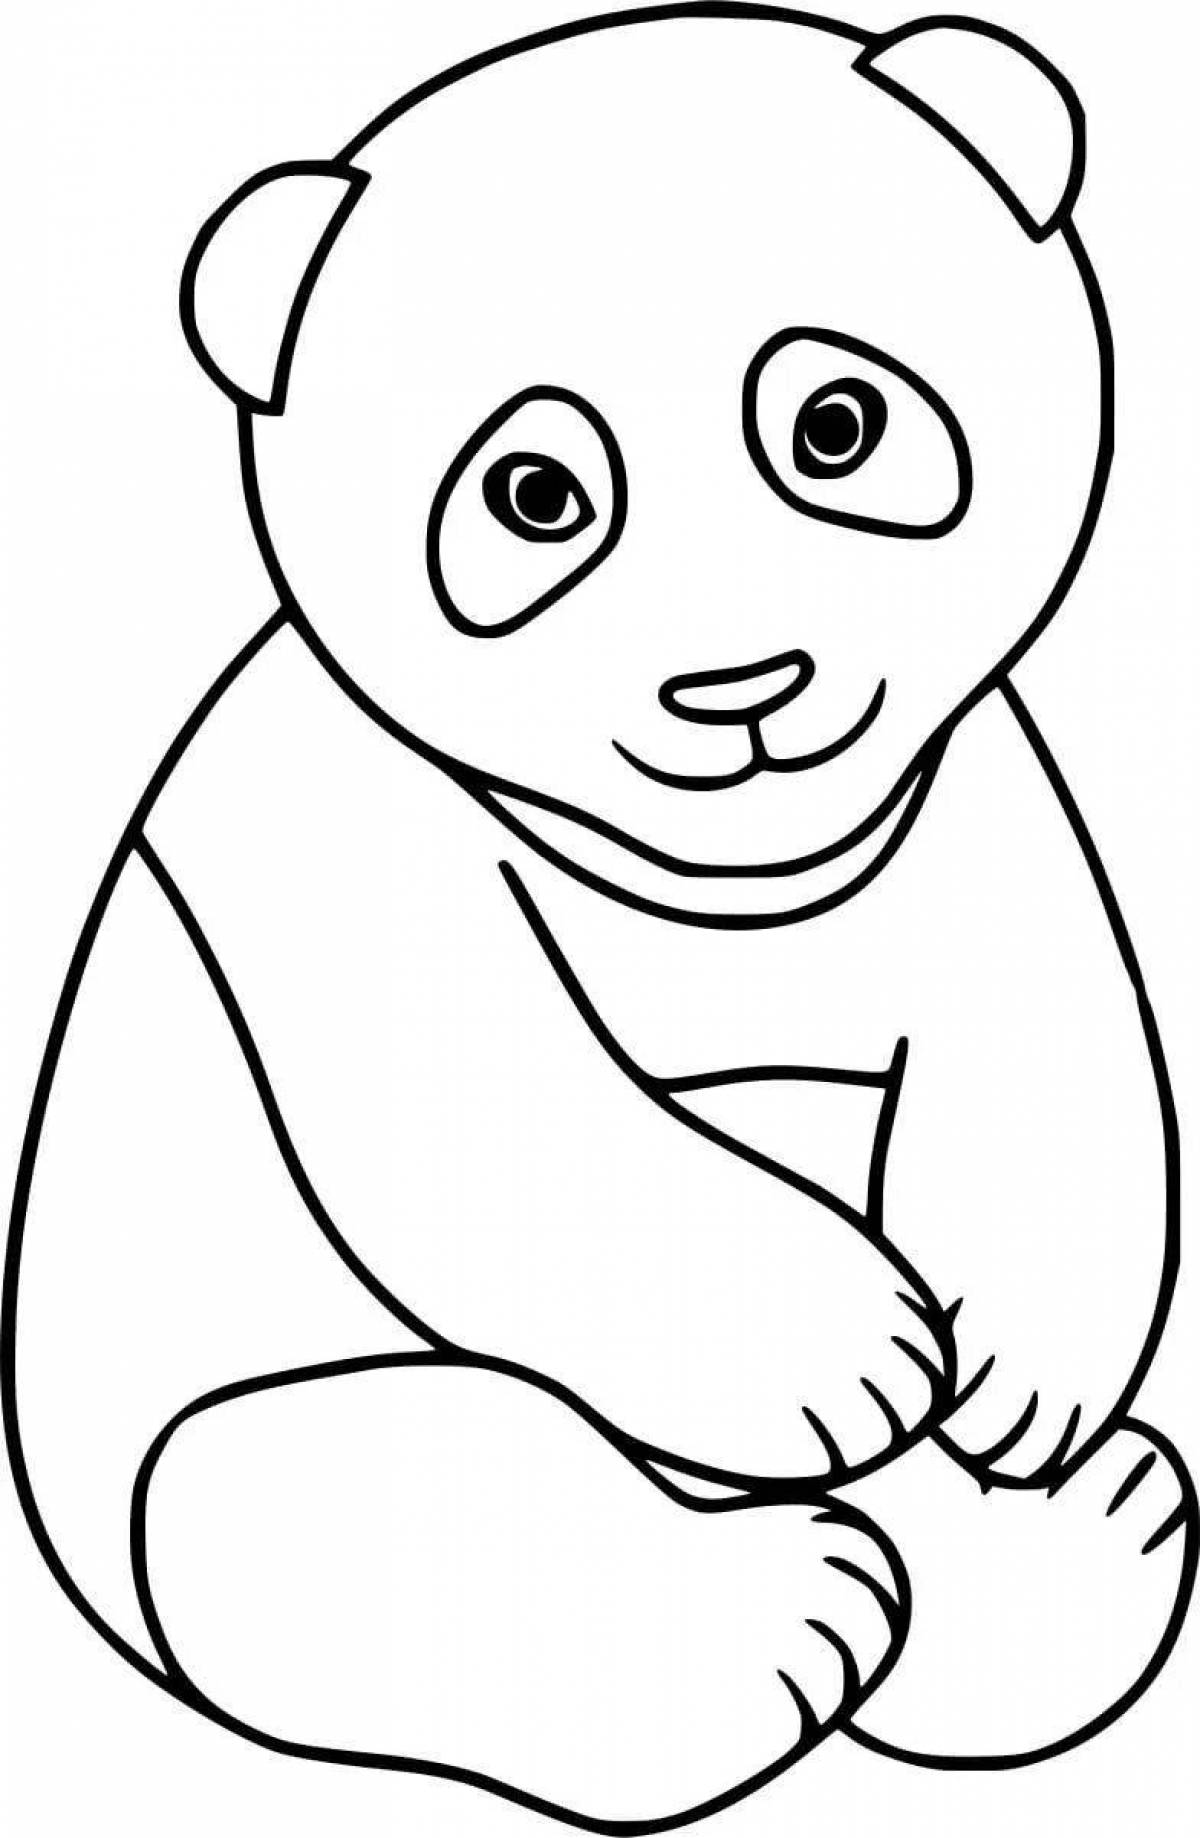 Exciting panda coloring book for kids